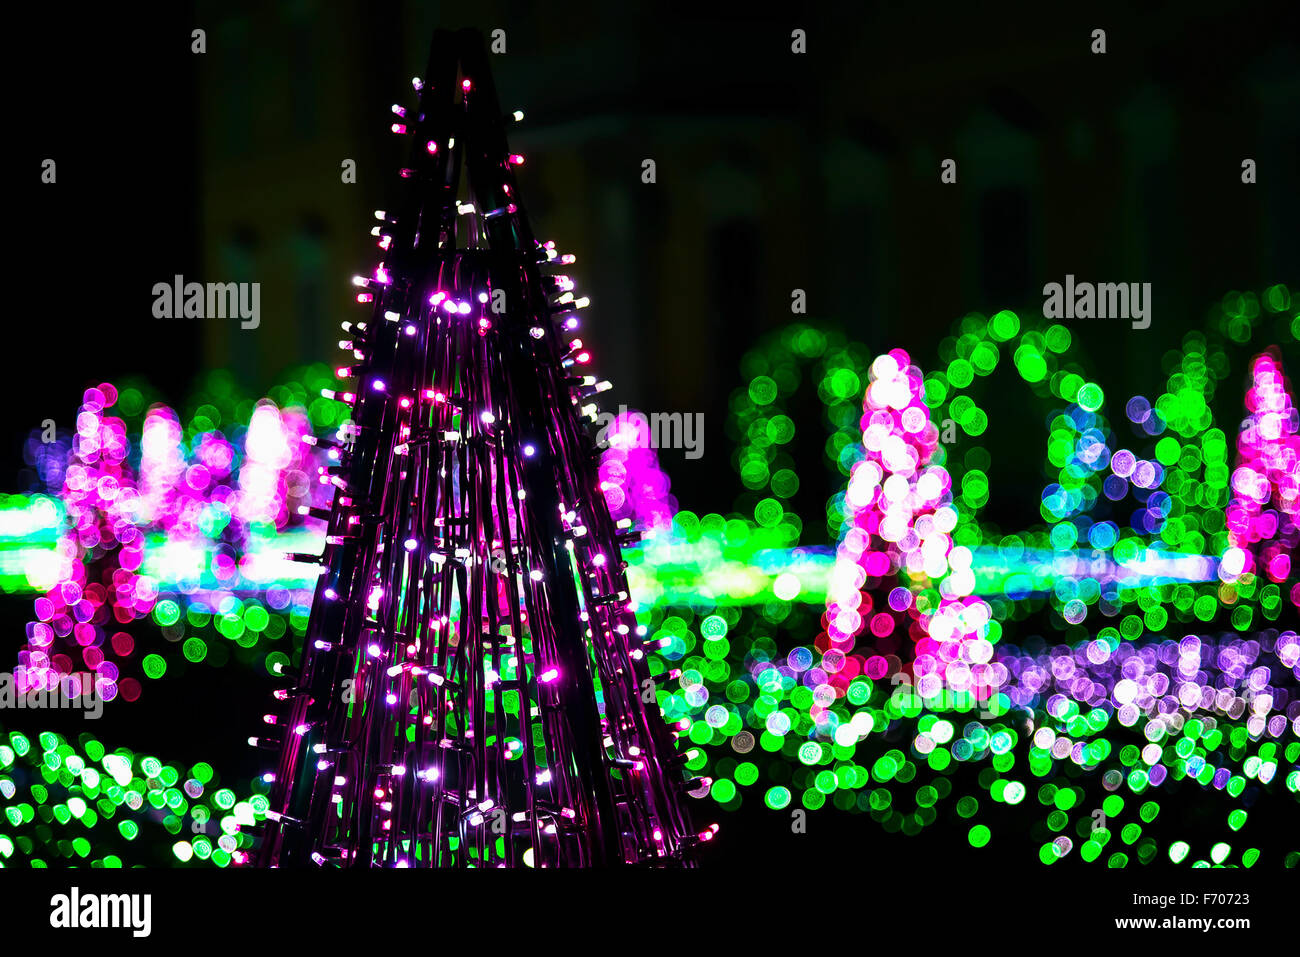 Garden of Colorful Lights with Sculptures of Purple Christmas Trees Stock Photo